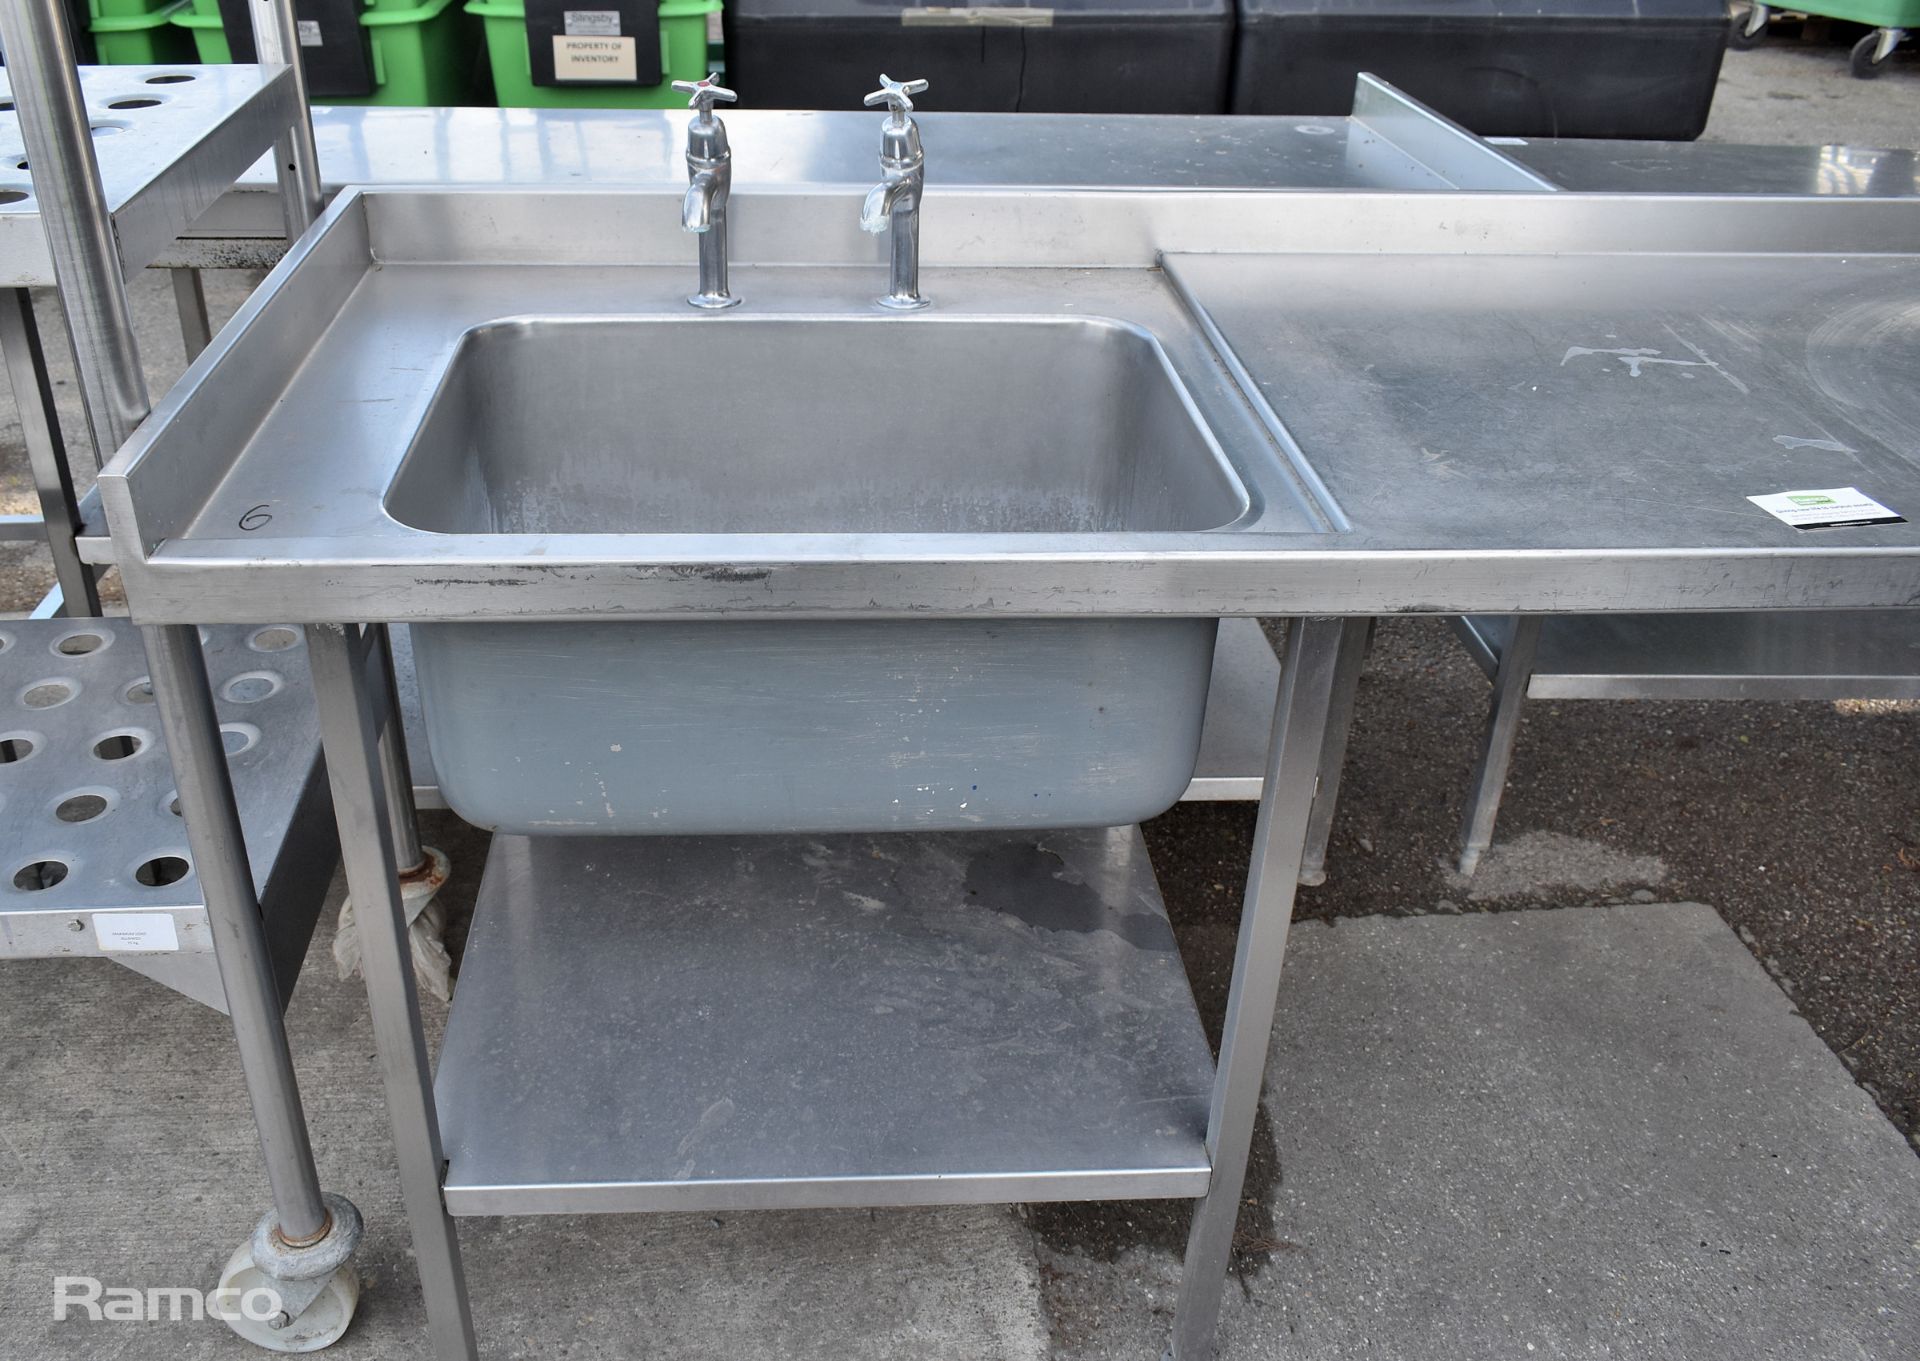 Stainless steel single sink bowl and counter top unit - L210 x W70 x H110cm - Bild 2 aus 5